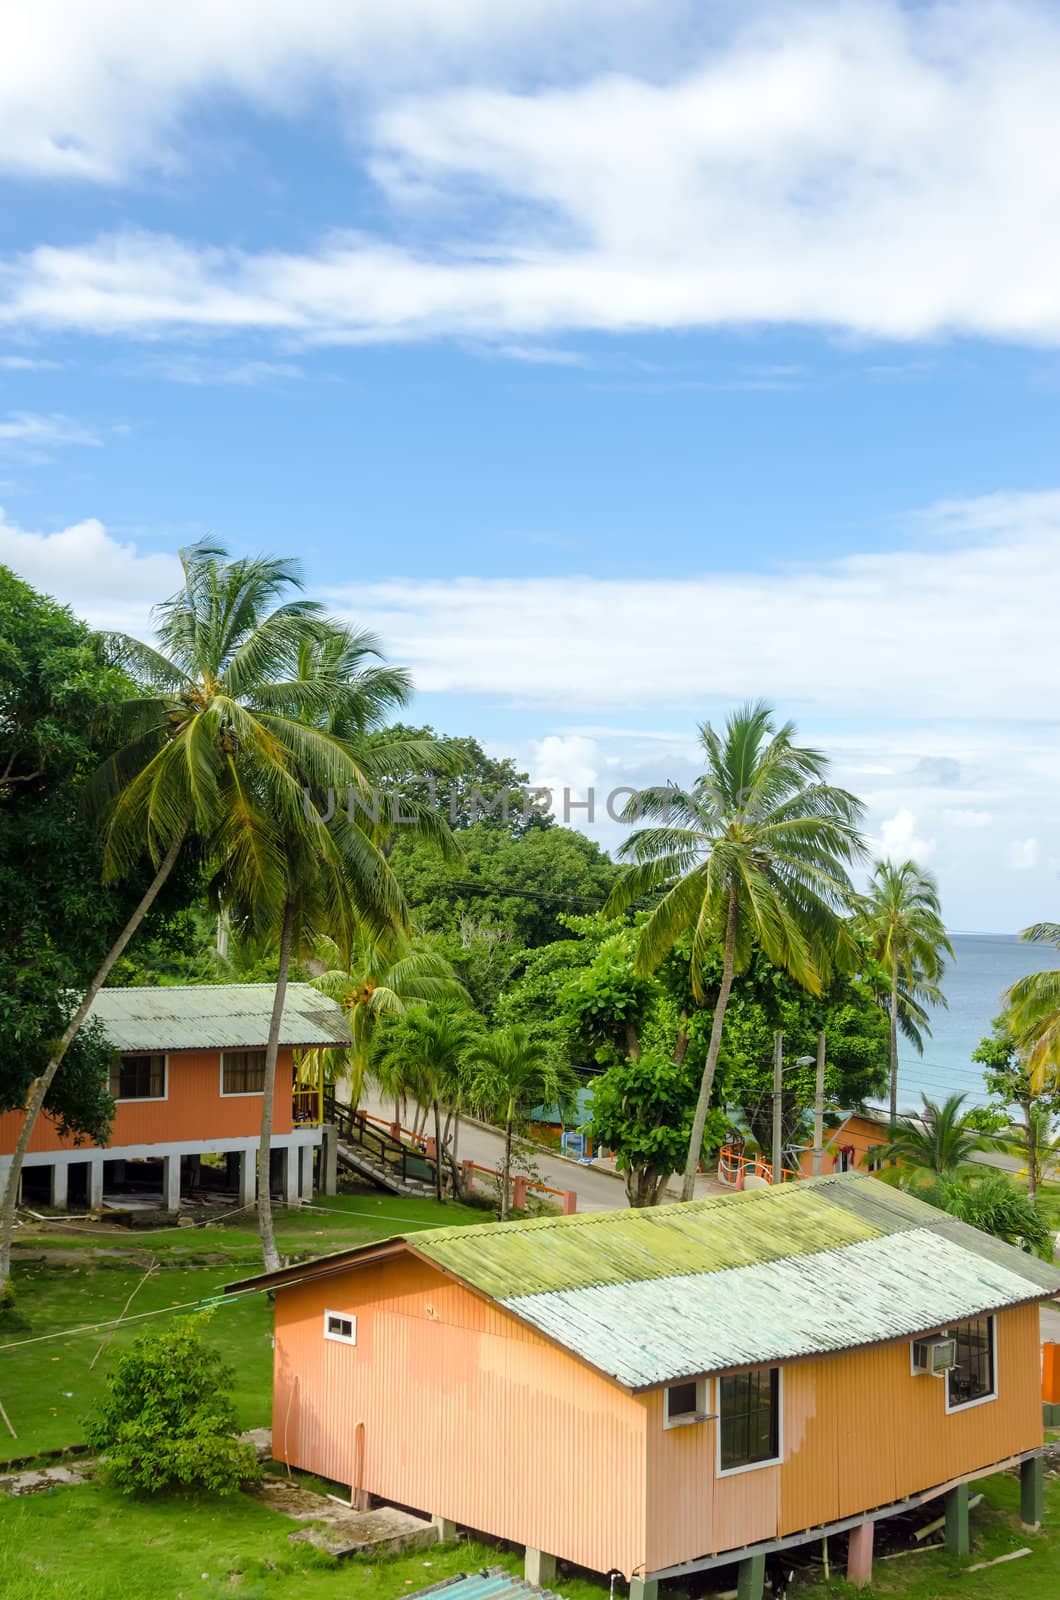 Bungalows surrounded by palm trees looking out on the Caribbean sea